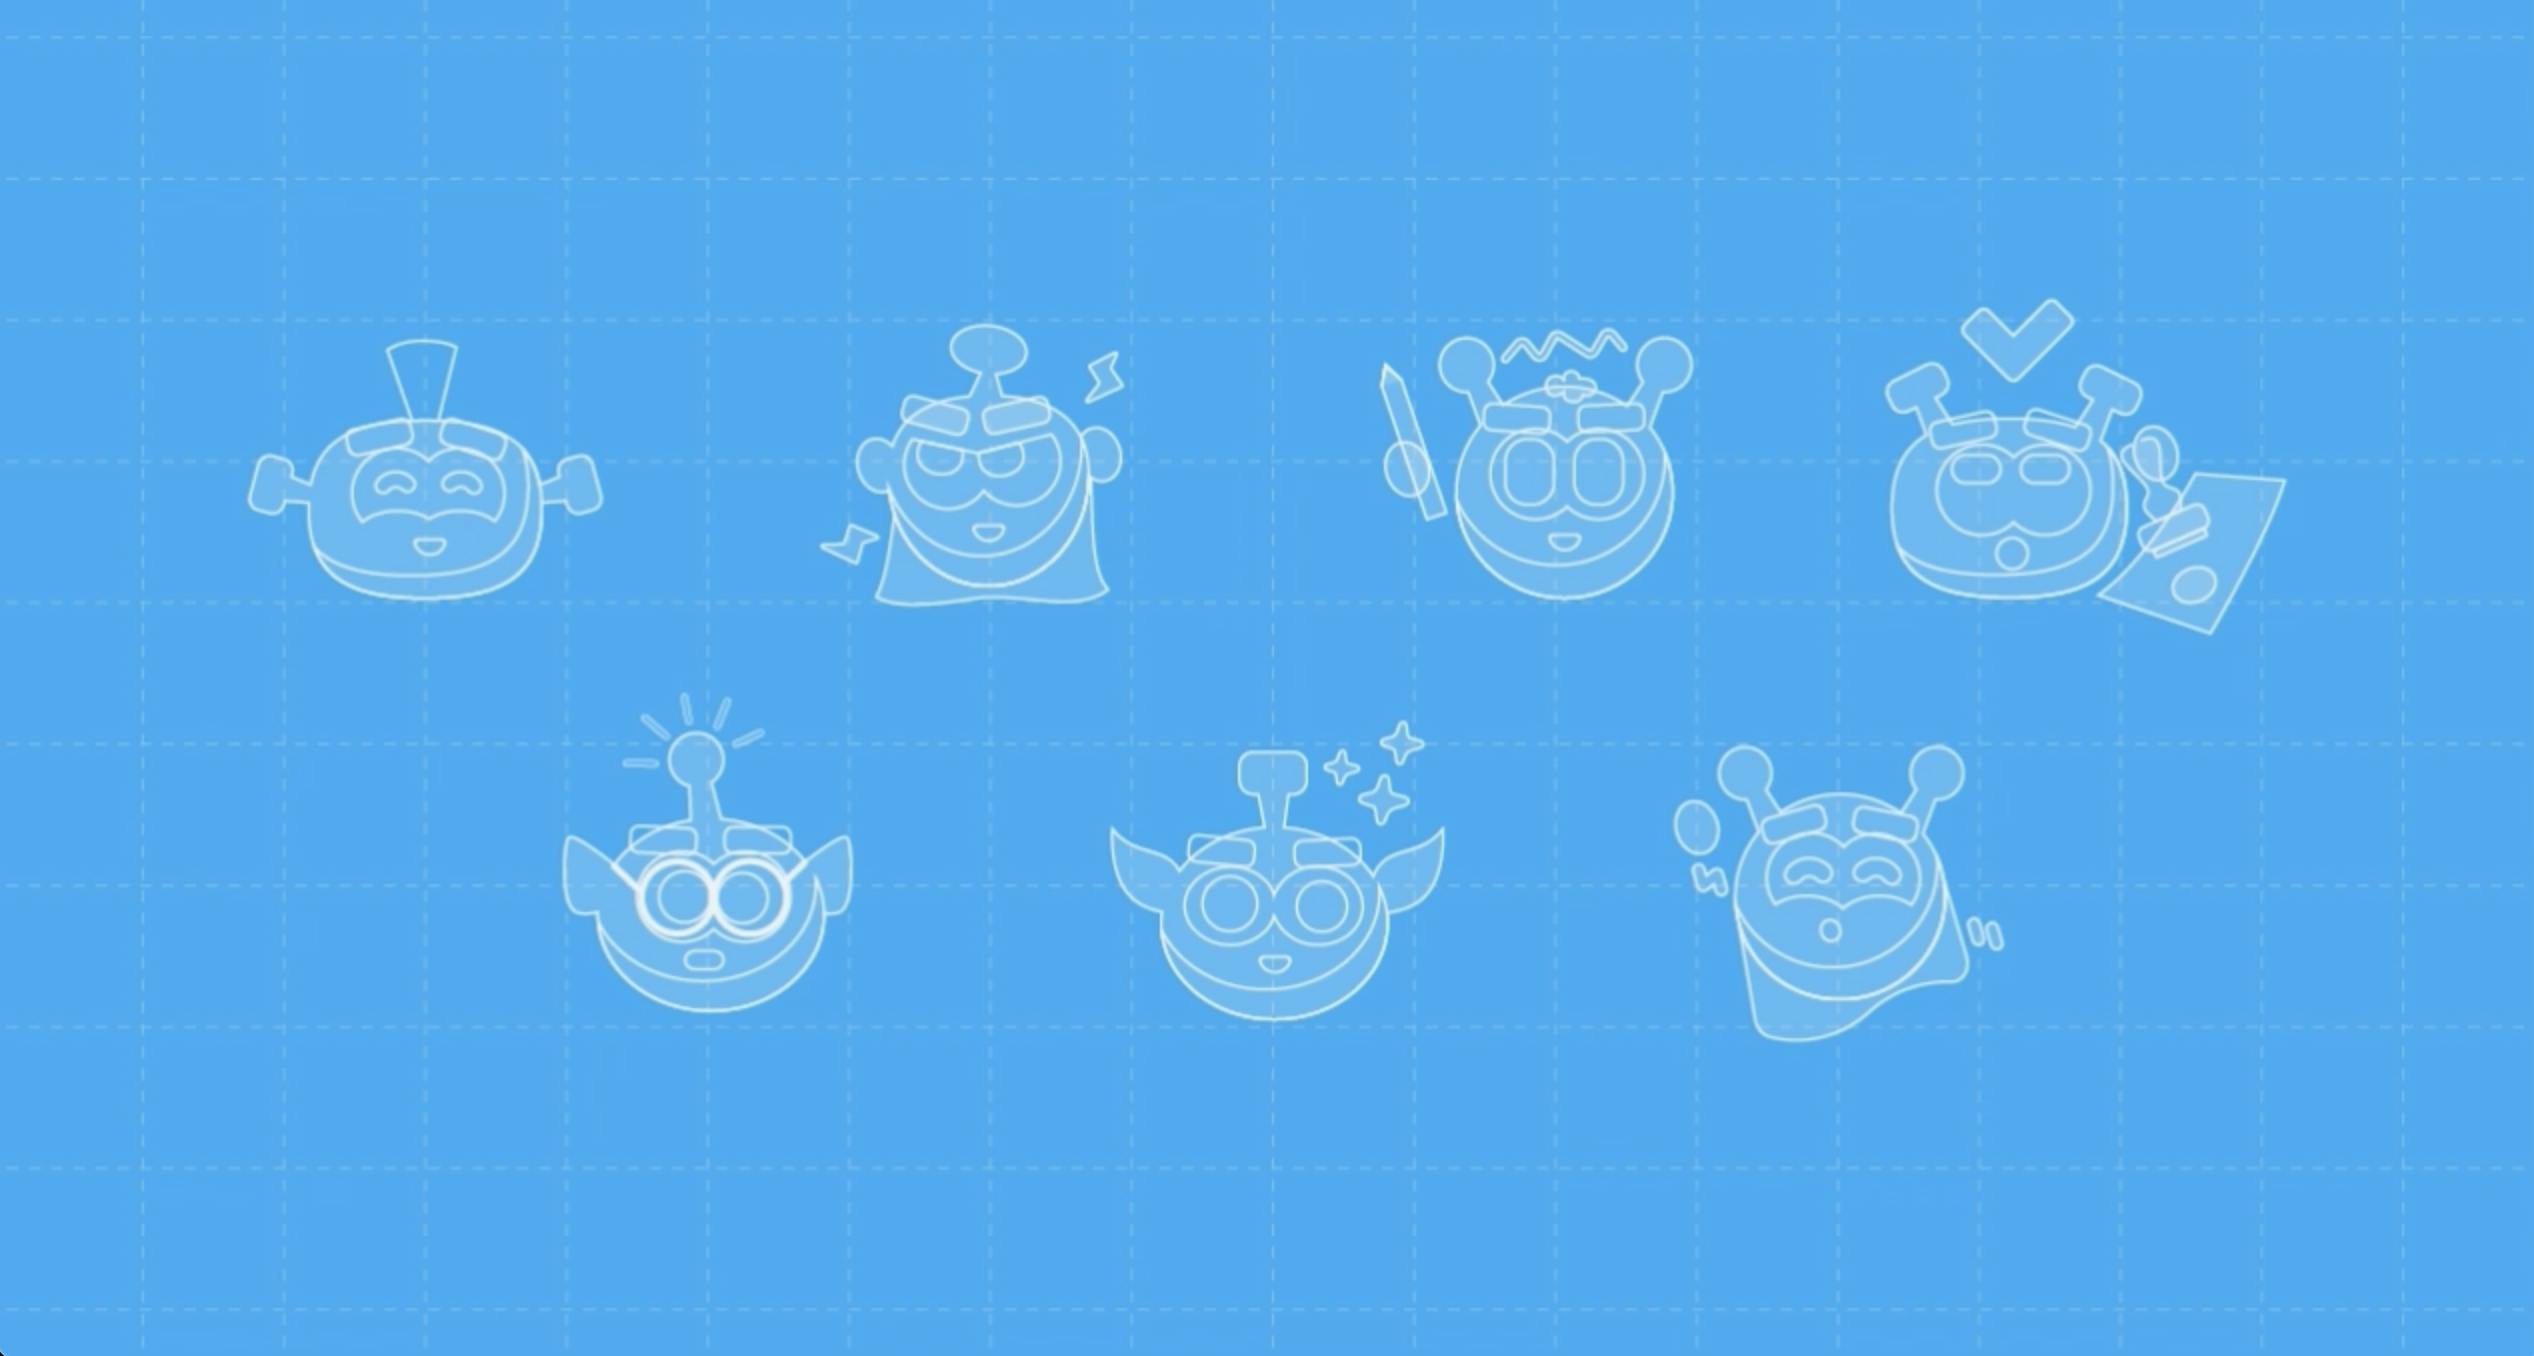 Sololearn character shapes blueprint